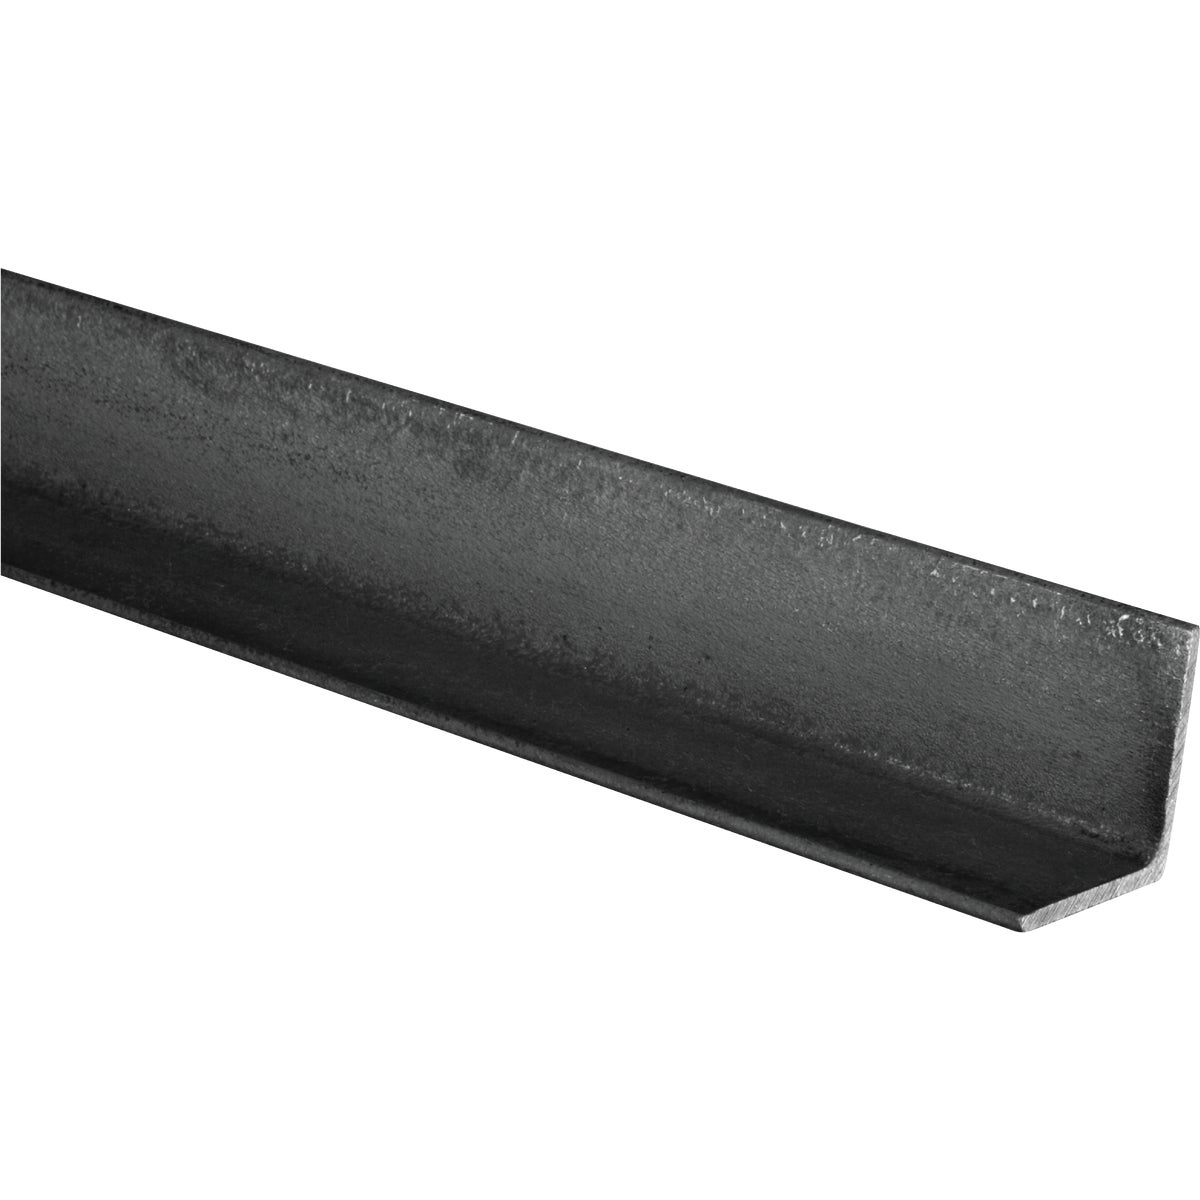 Hillman Steelworks 1-1/2 In. x 3 Ft., 3/16 In. Weldable Solid Angle